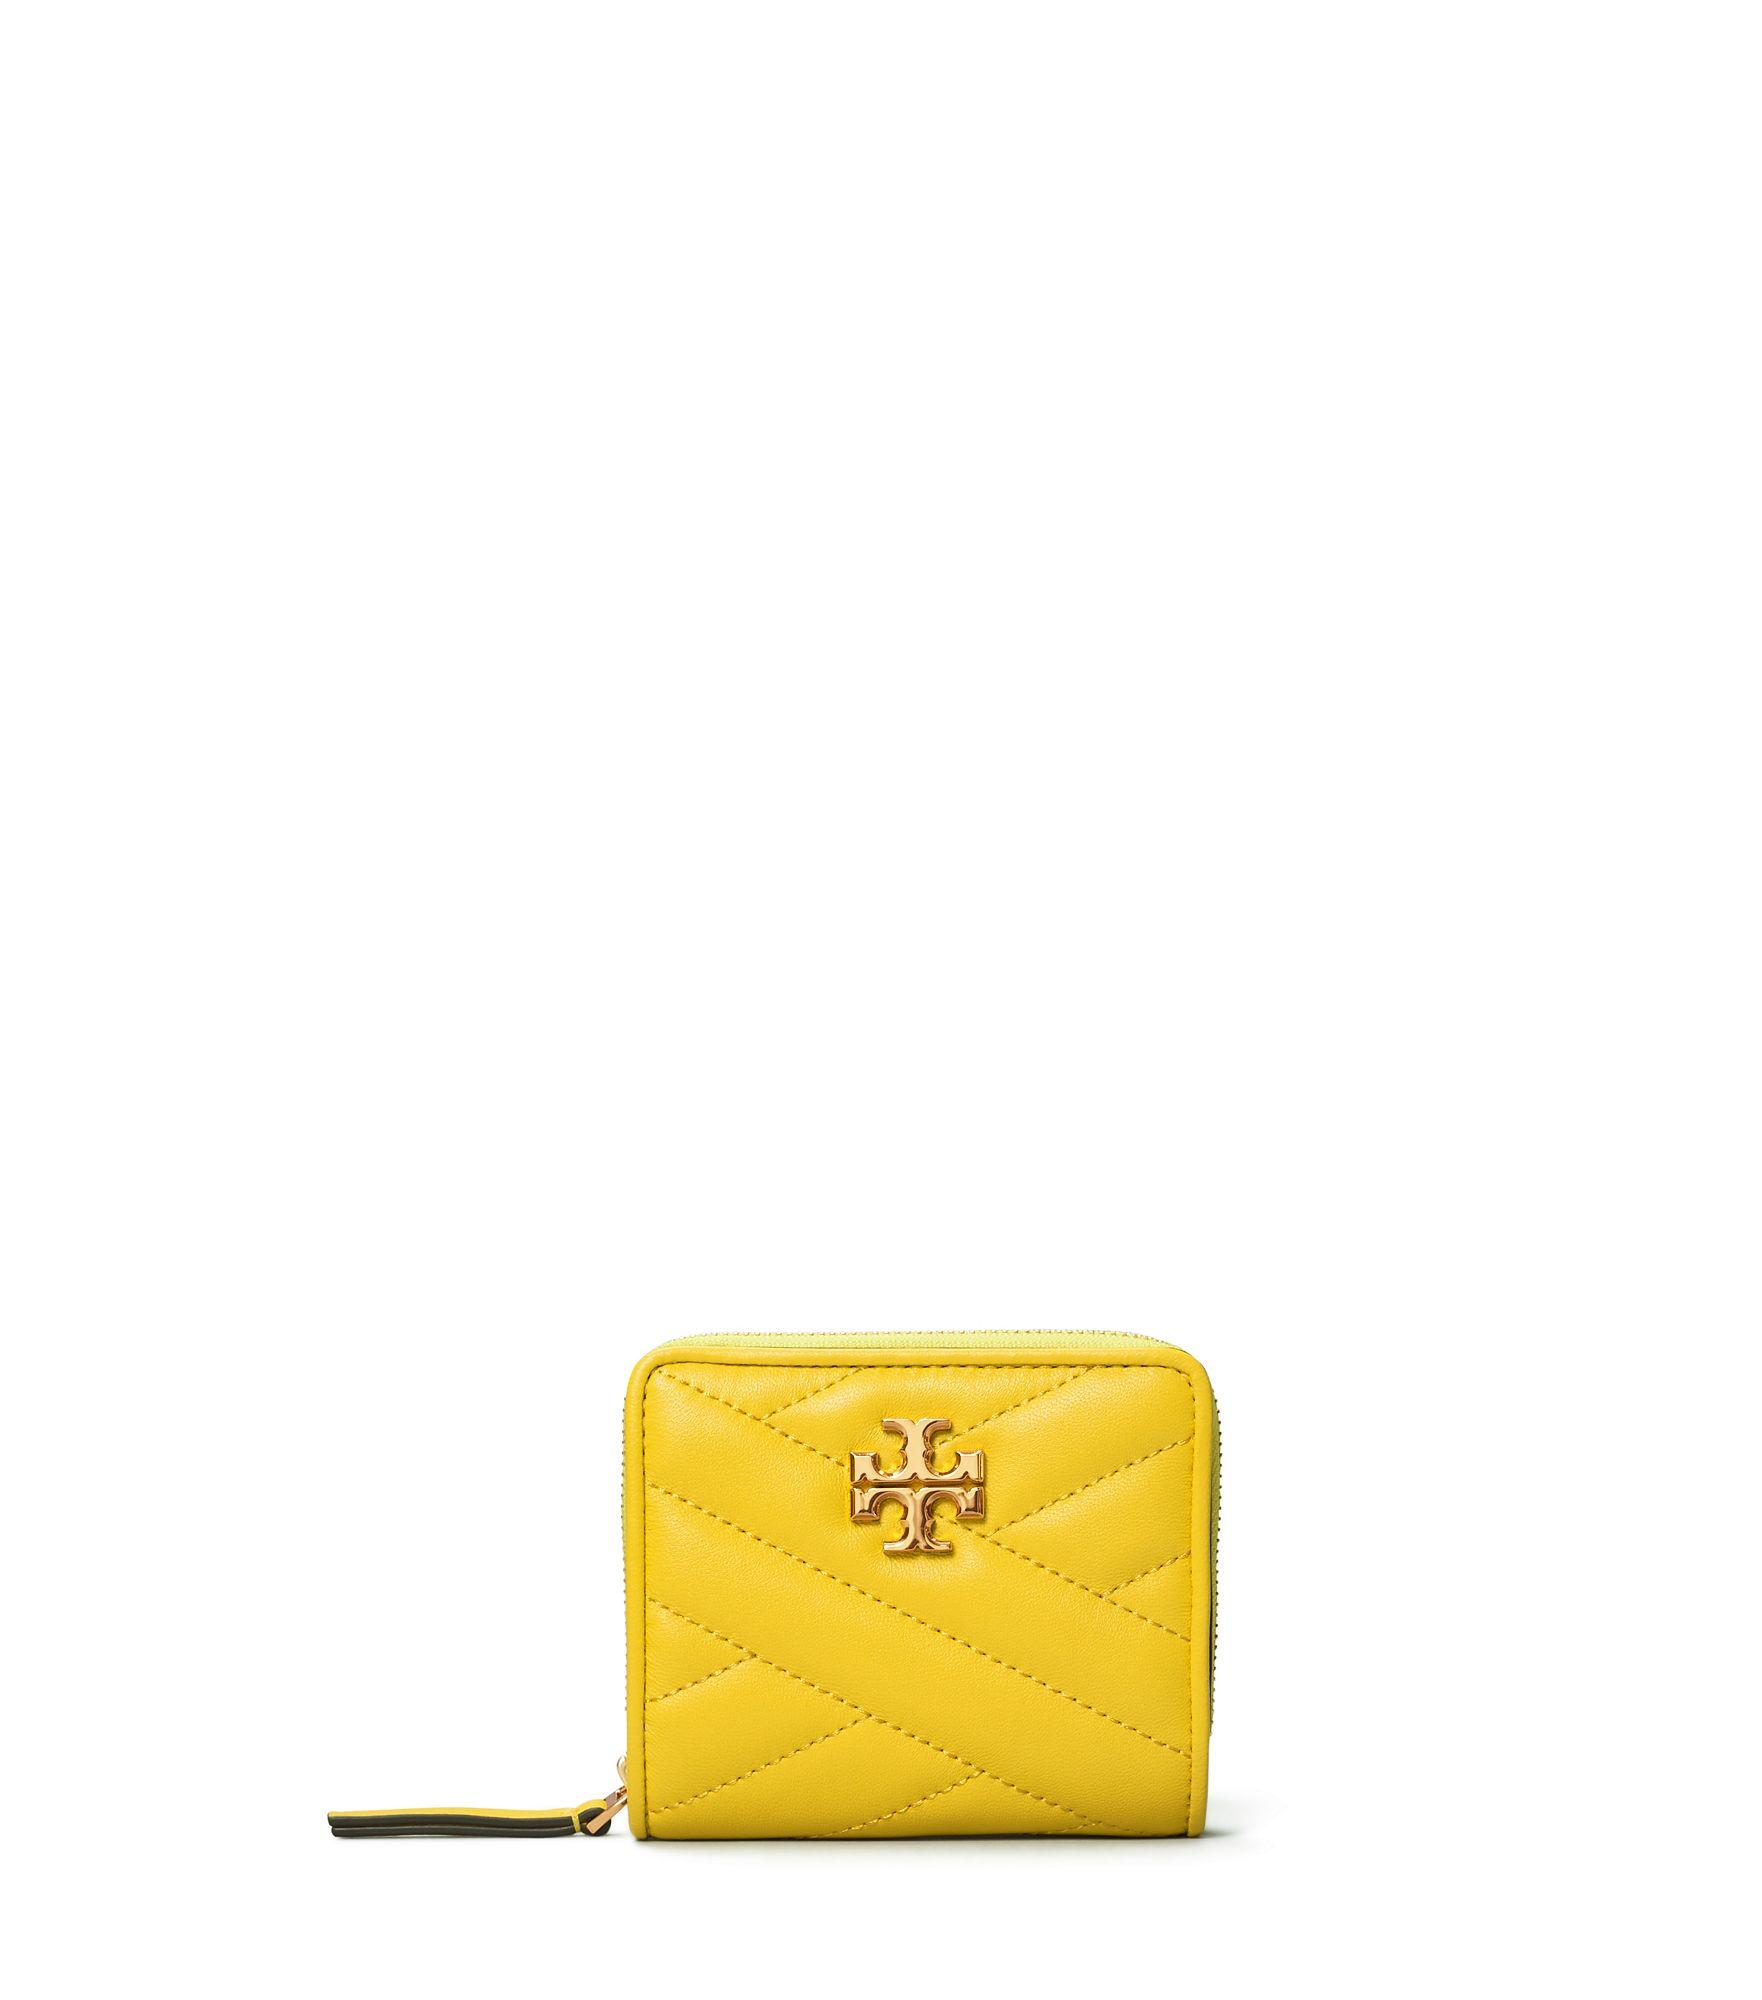 Tory Burch Leather Kira Zipped Wallet in Yellow - Lyst